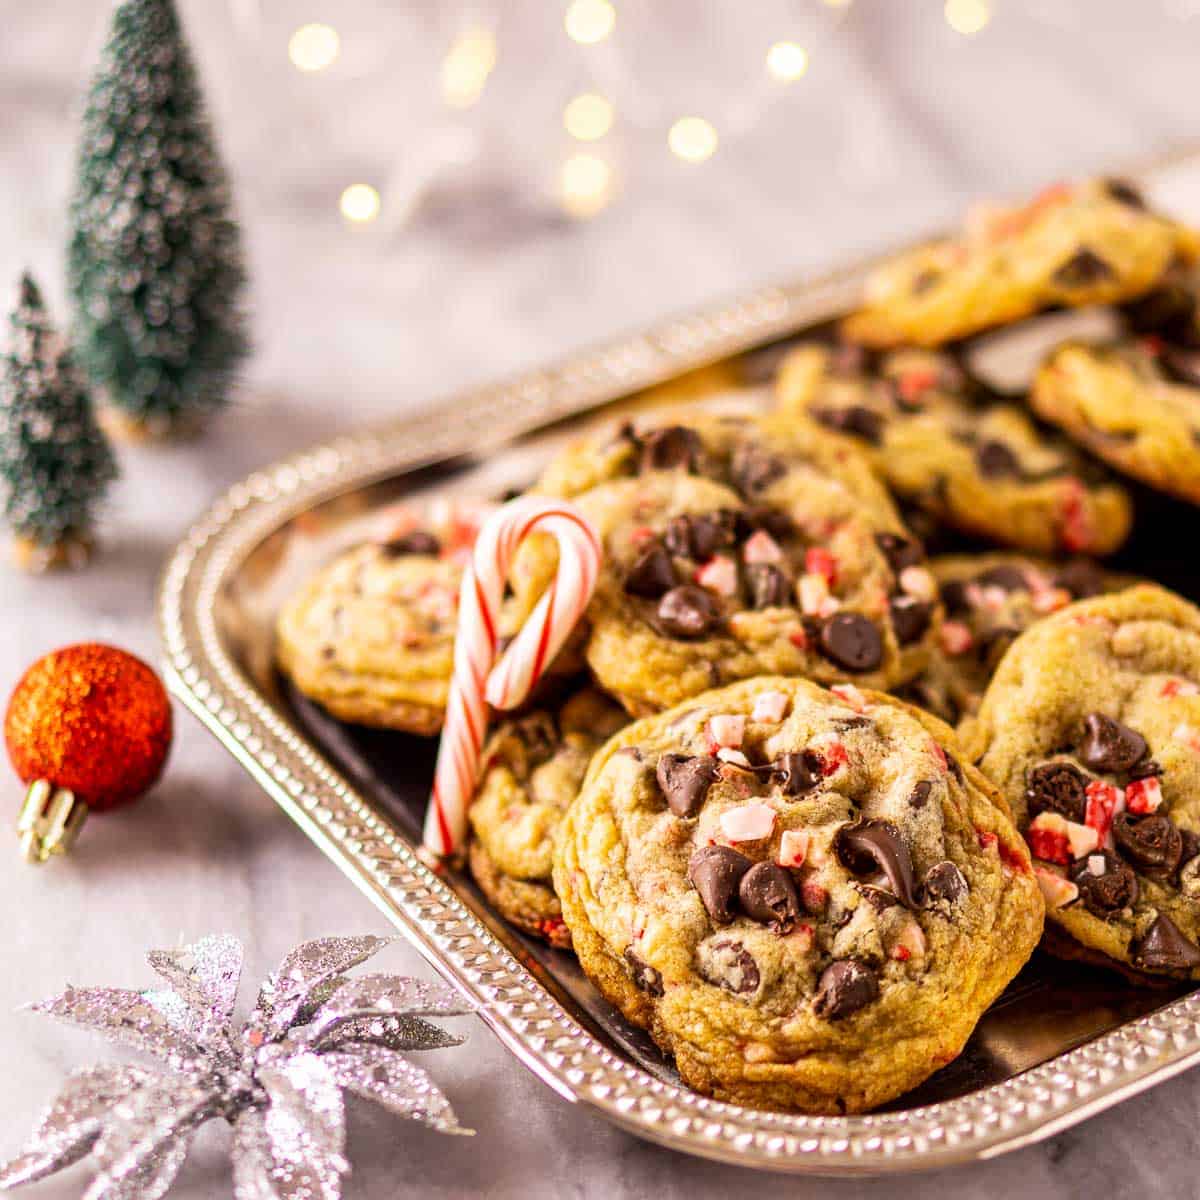 The peppermint chocolate chip cookies on a silver platter with holiday decor and lights around it.